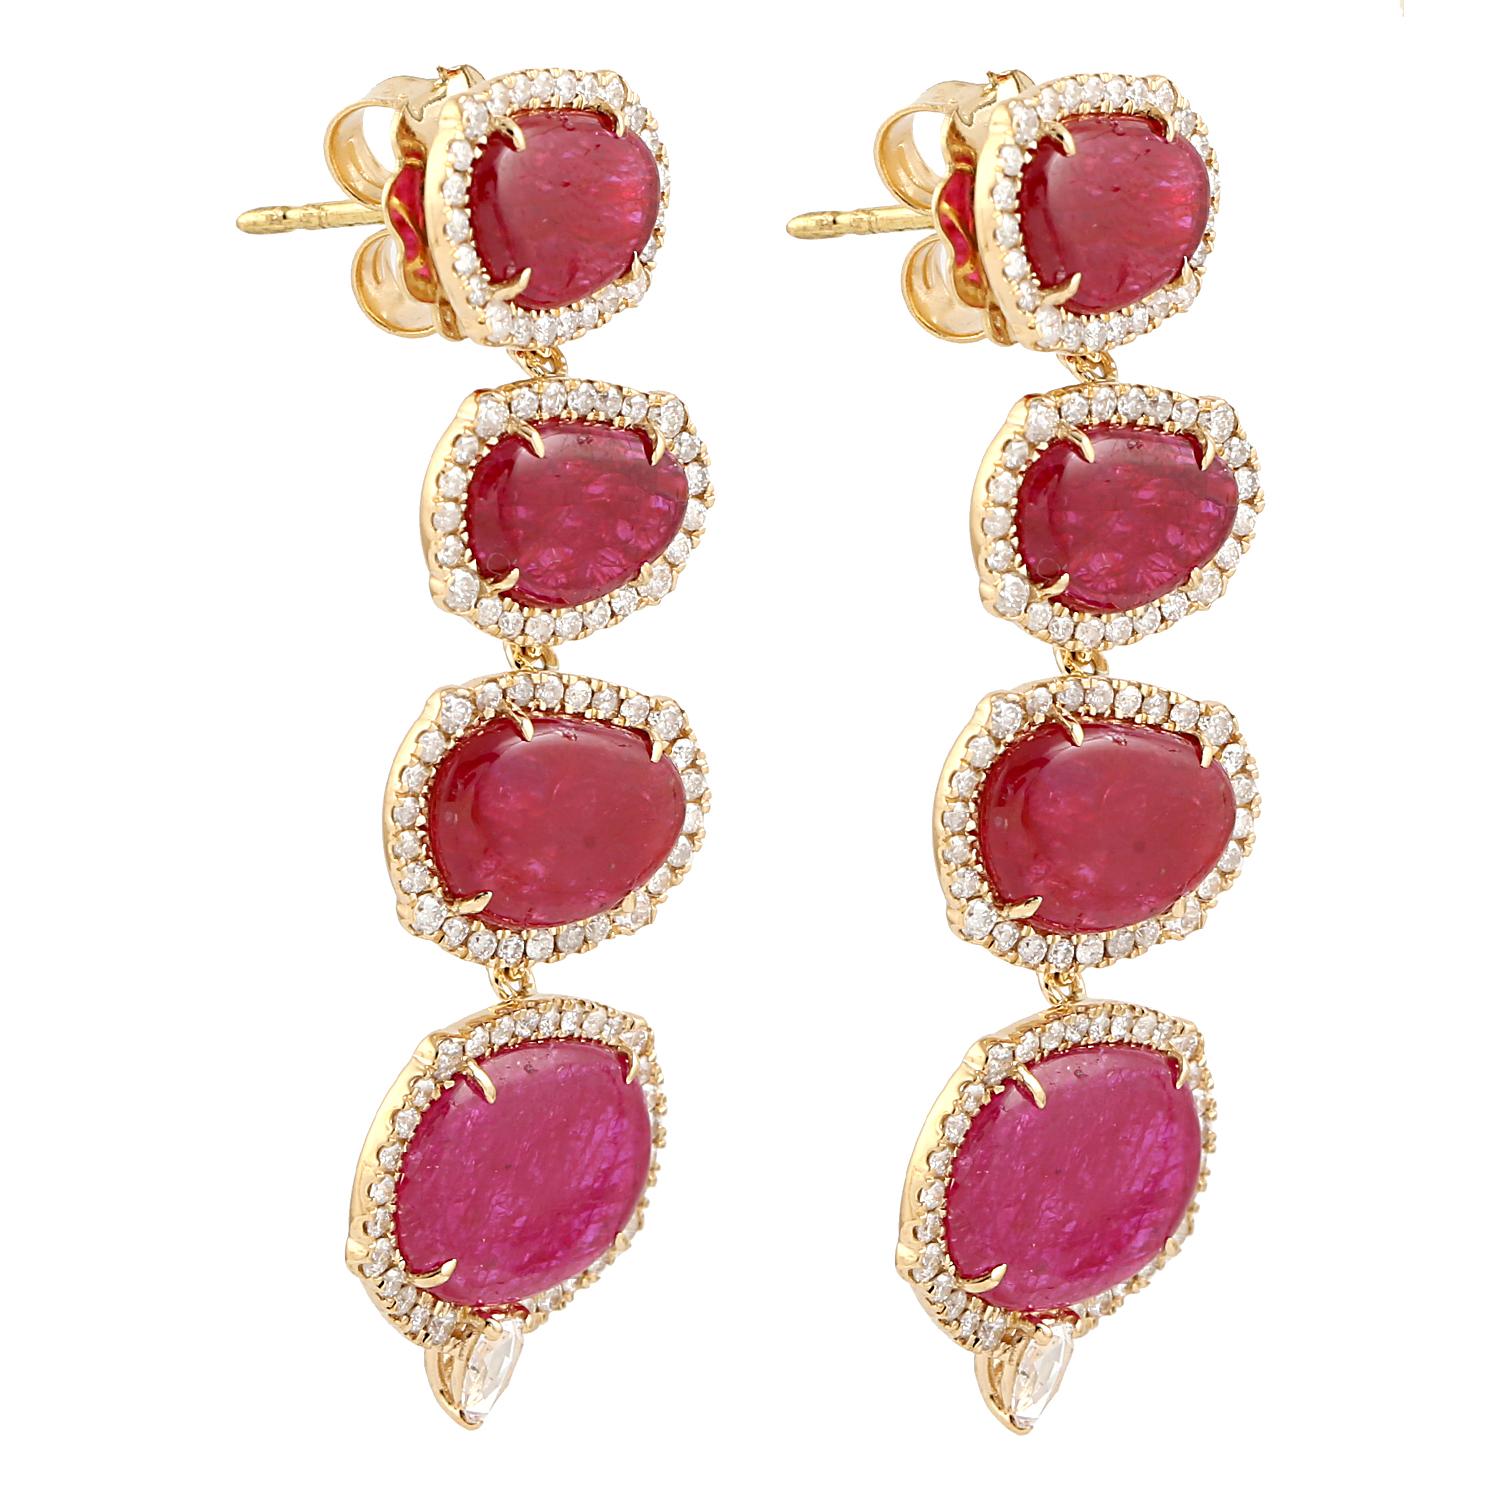 Contemporary 14.43 ct Ruby Dangle Earrings With Diamonds Made In 18k Yellow Gold For Sale